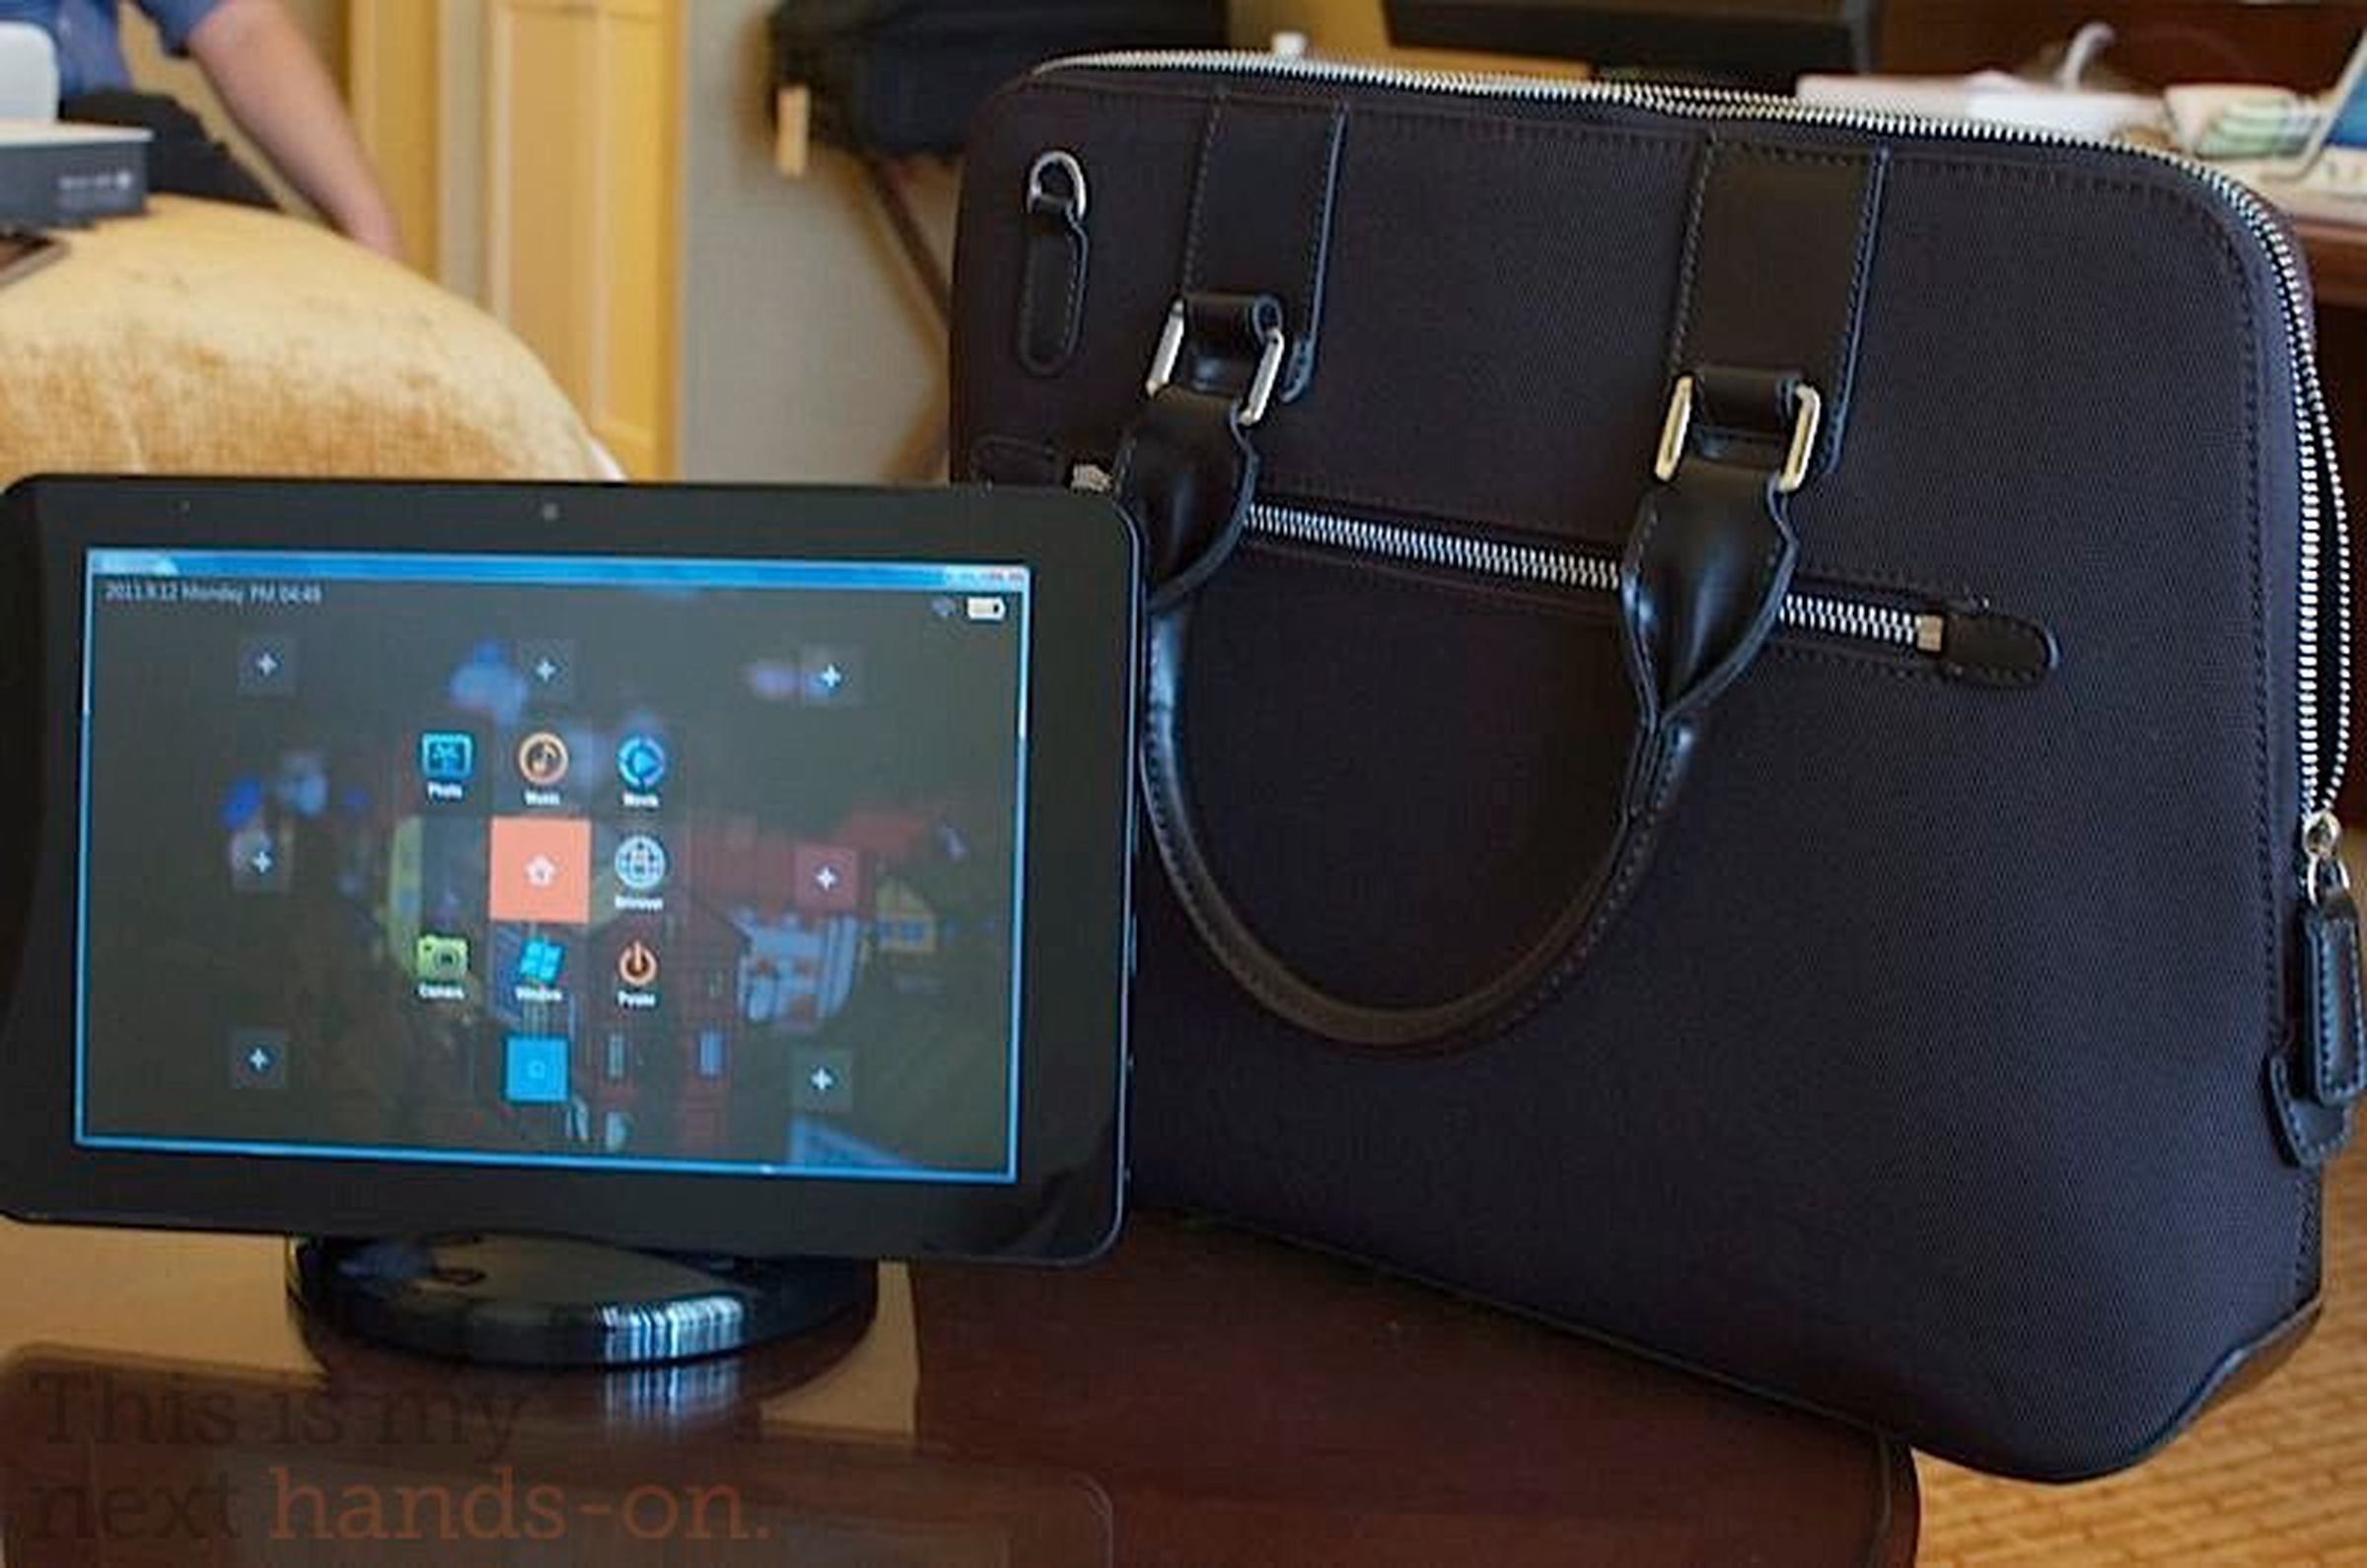 OCS9 Windows 7 Tablet and O-Bar remotes from OCOSMOS: hands-on pictures